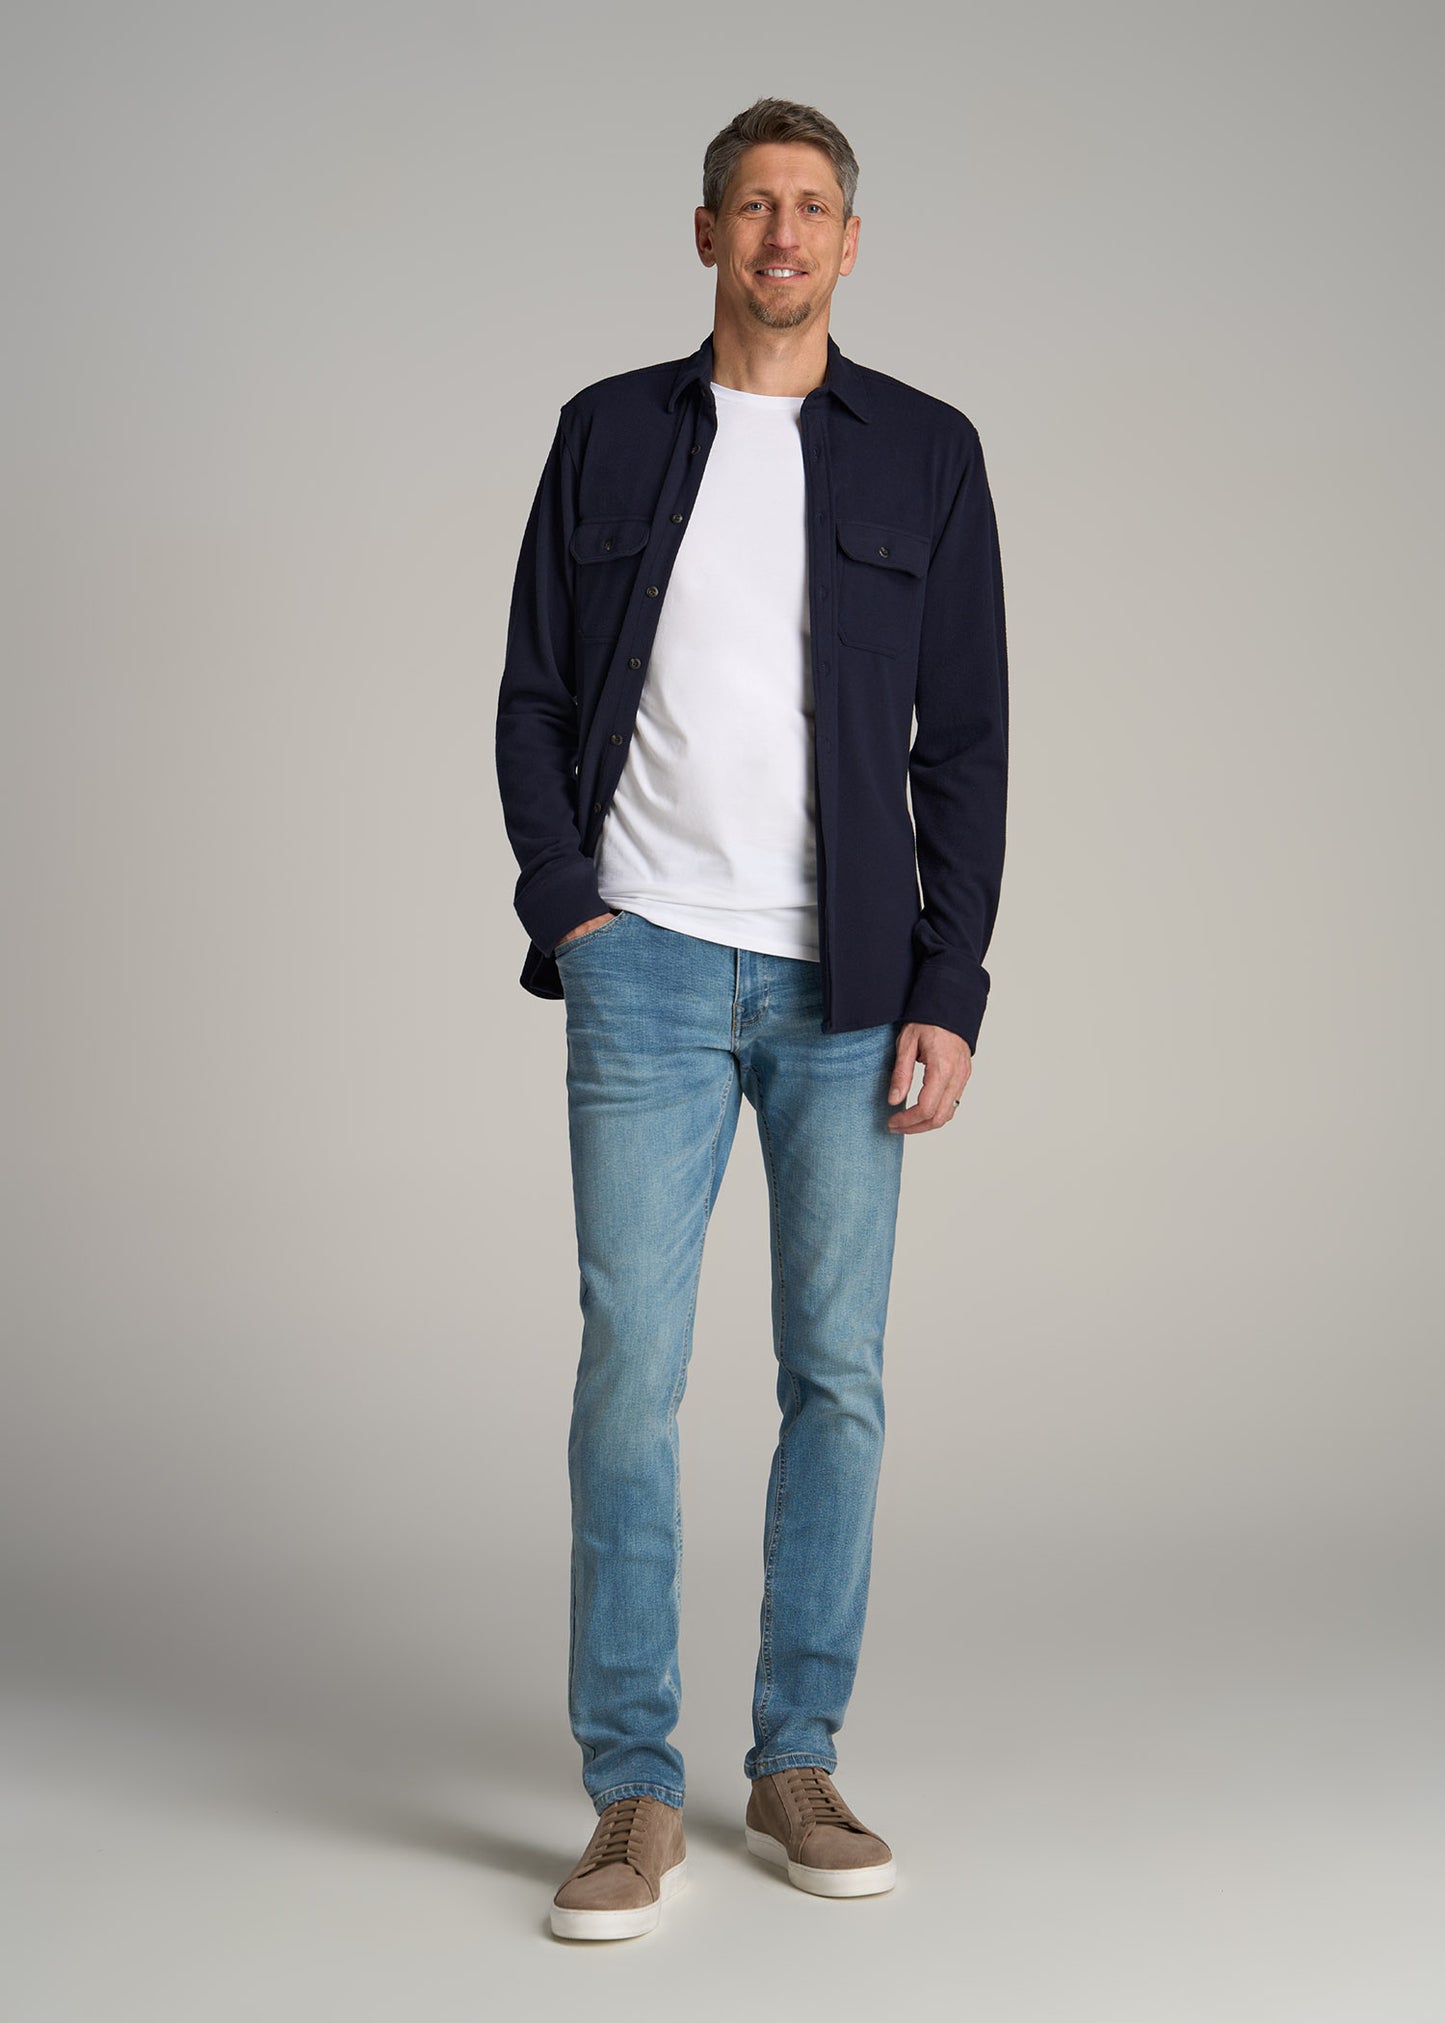 Carman TAPERED Jeans for Tall Men in New Fade